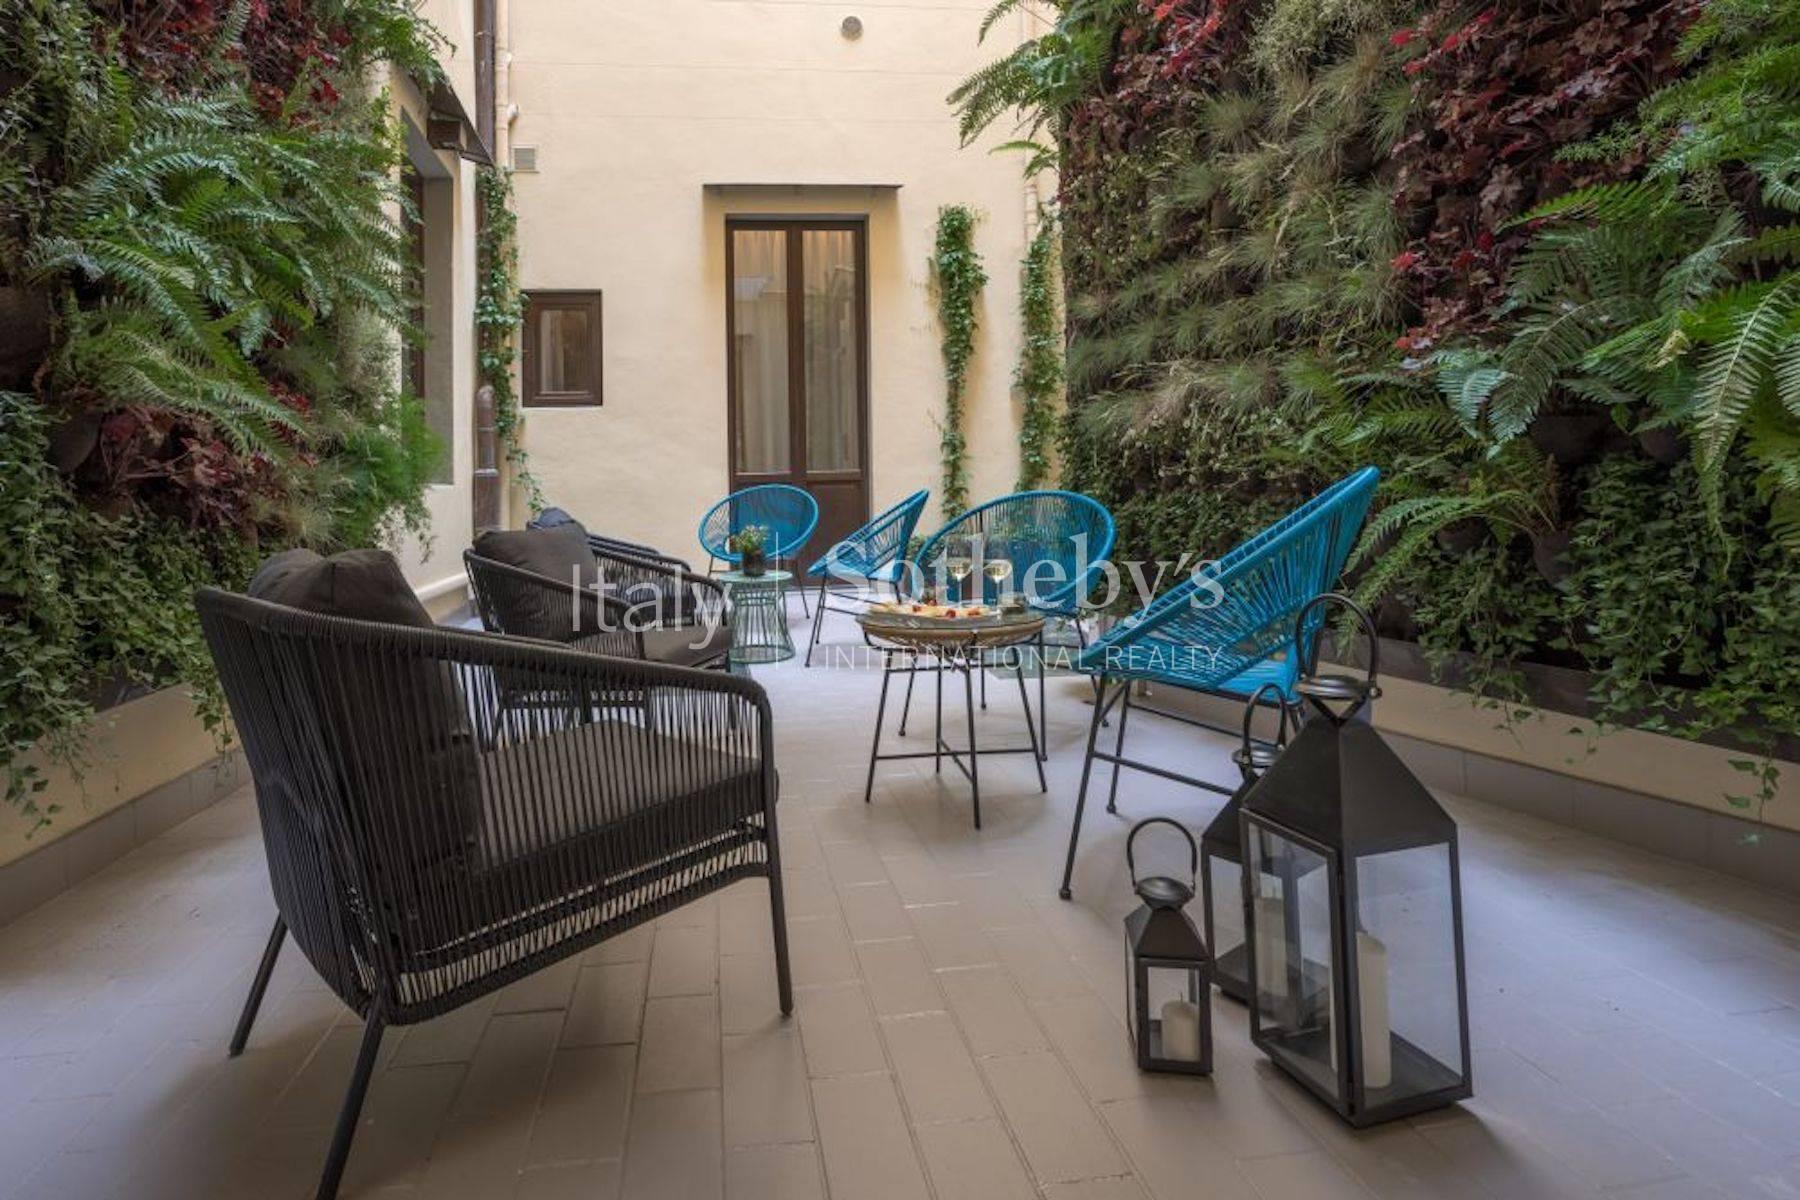 Mona Lisa apartment with courtyard in the heart of Florence - 14